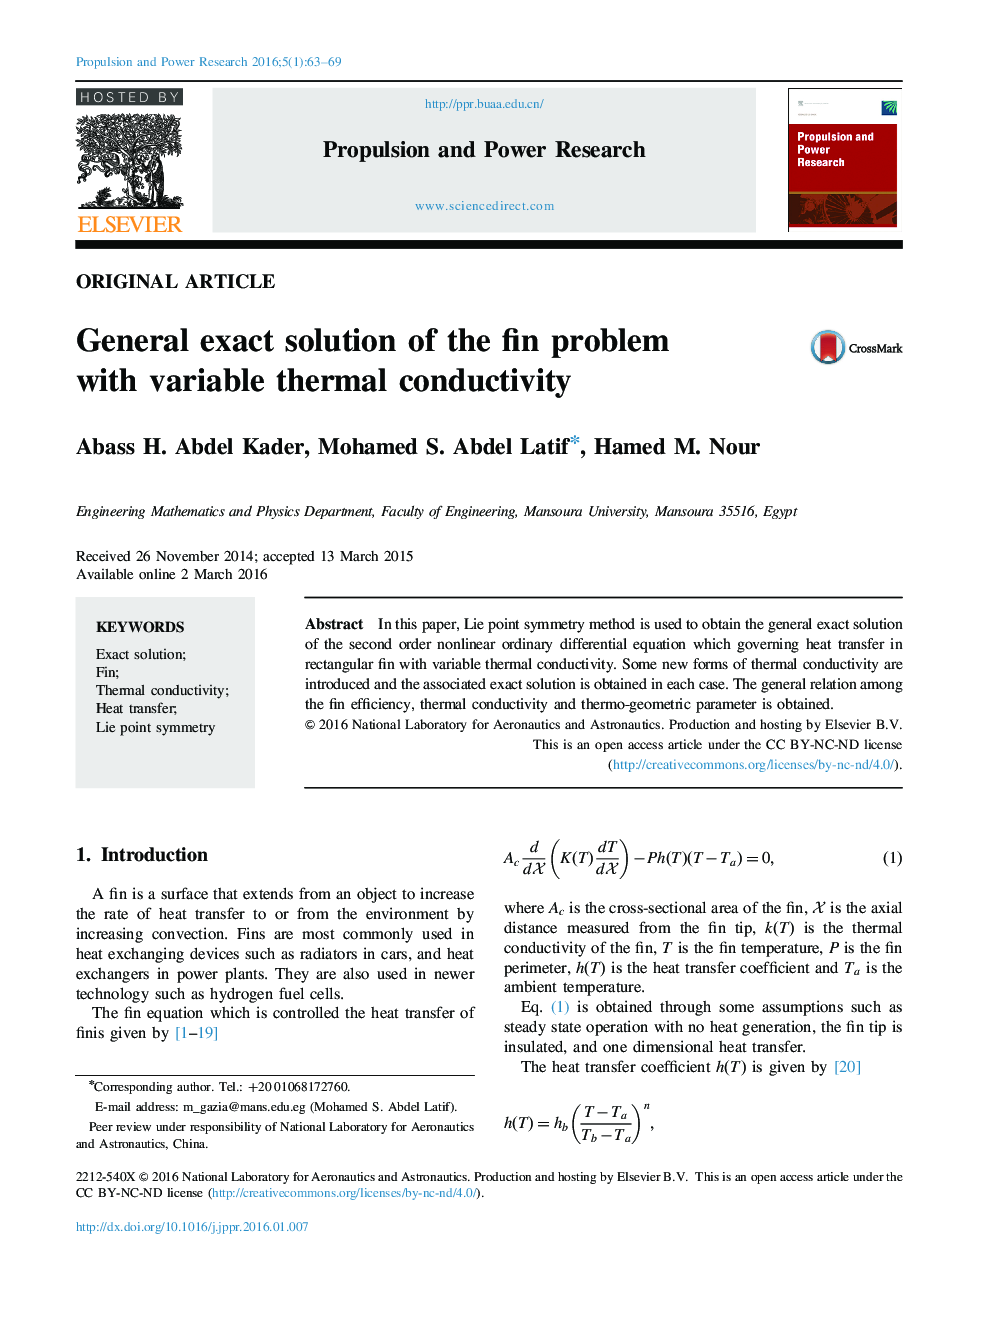 General exact solution of the fin problem with variable thermal conductivity 